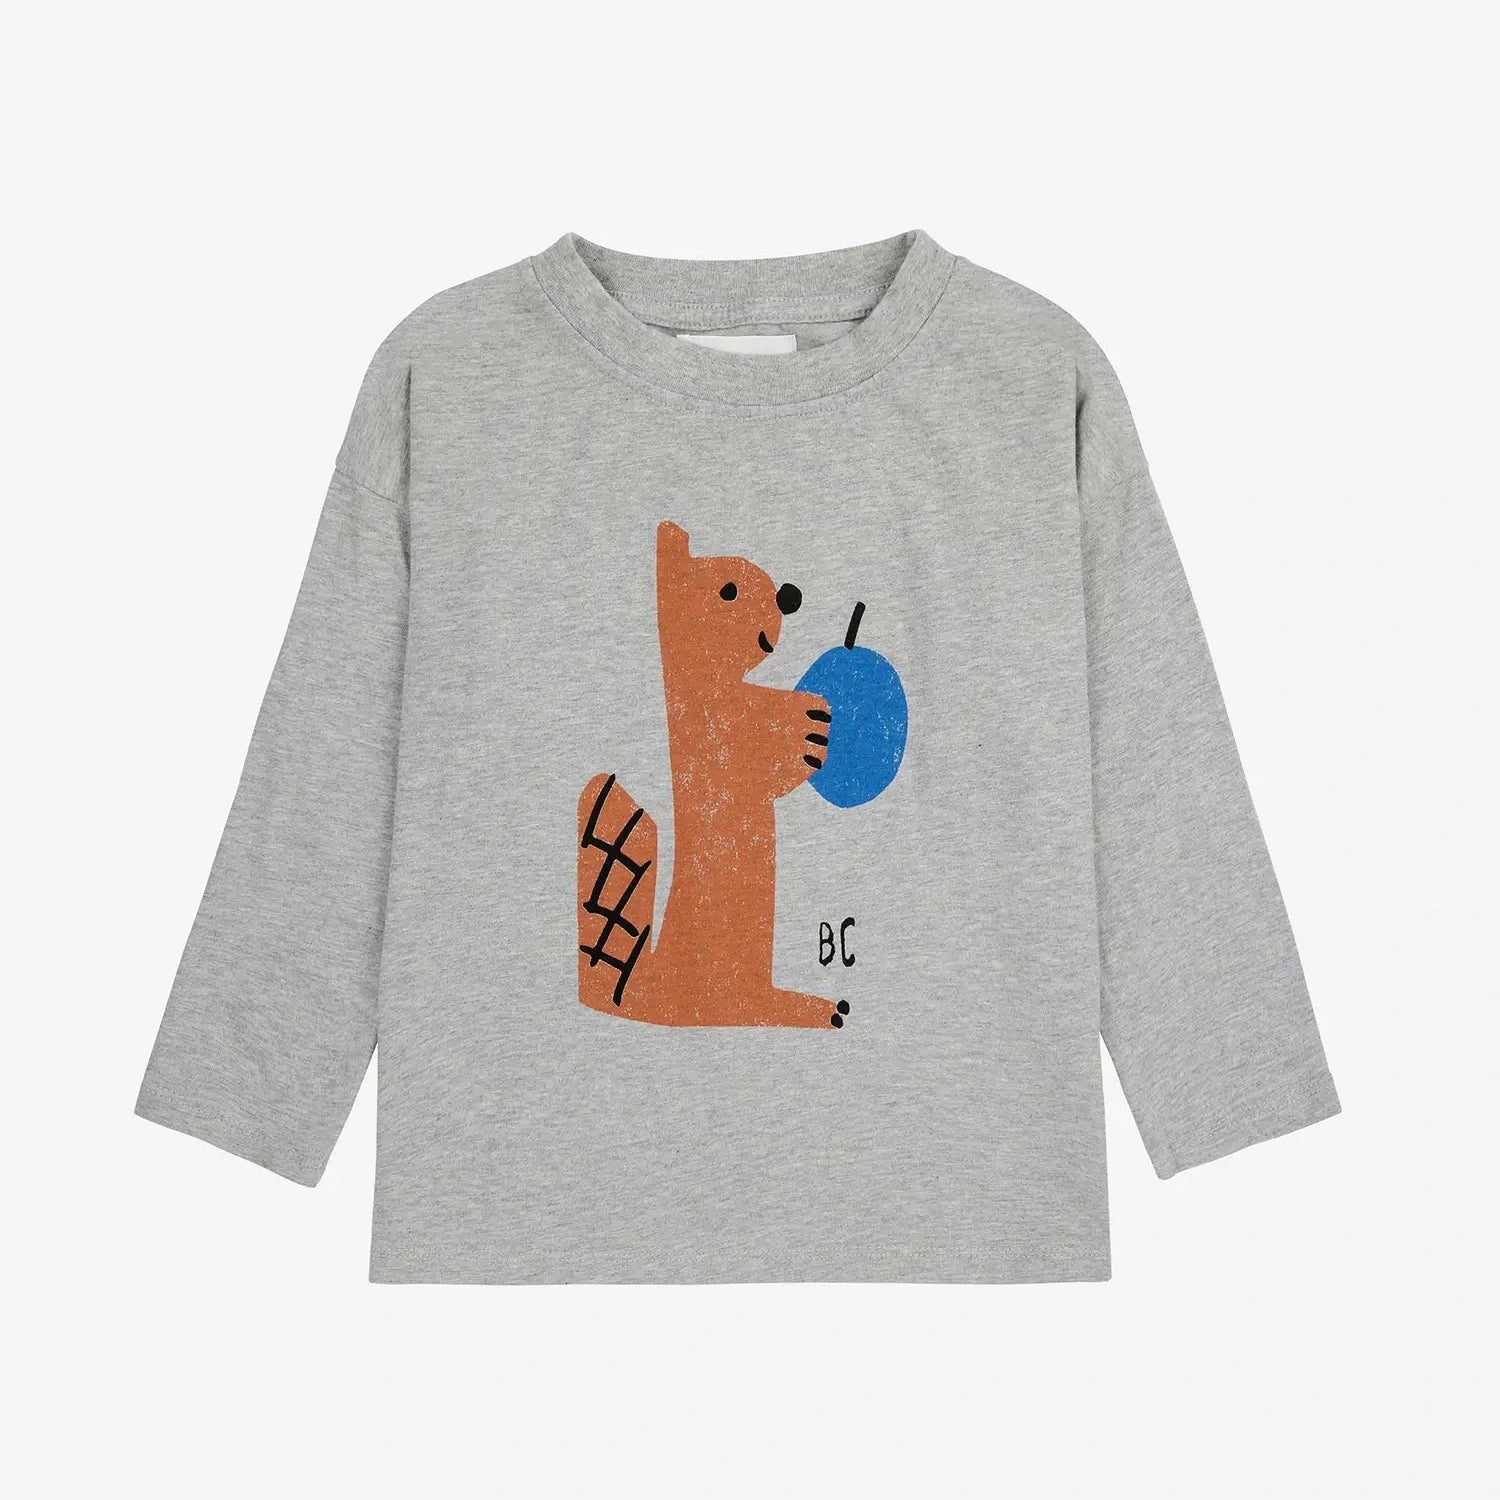 Hungry Squirrel T-shirt